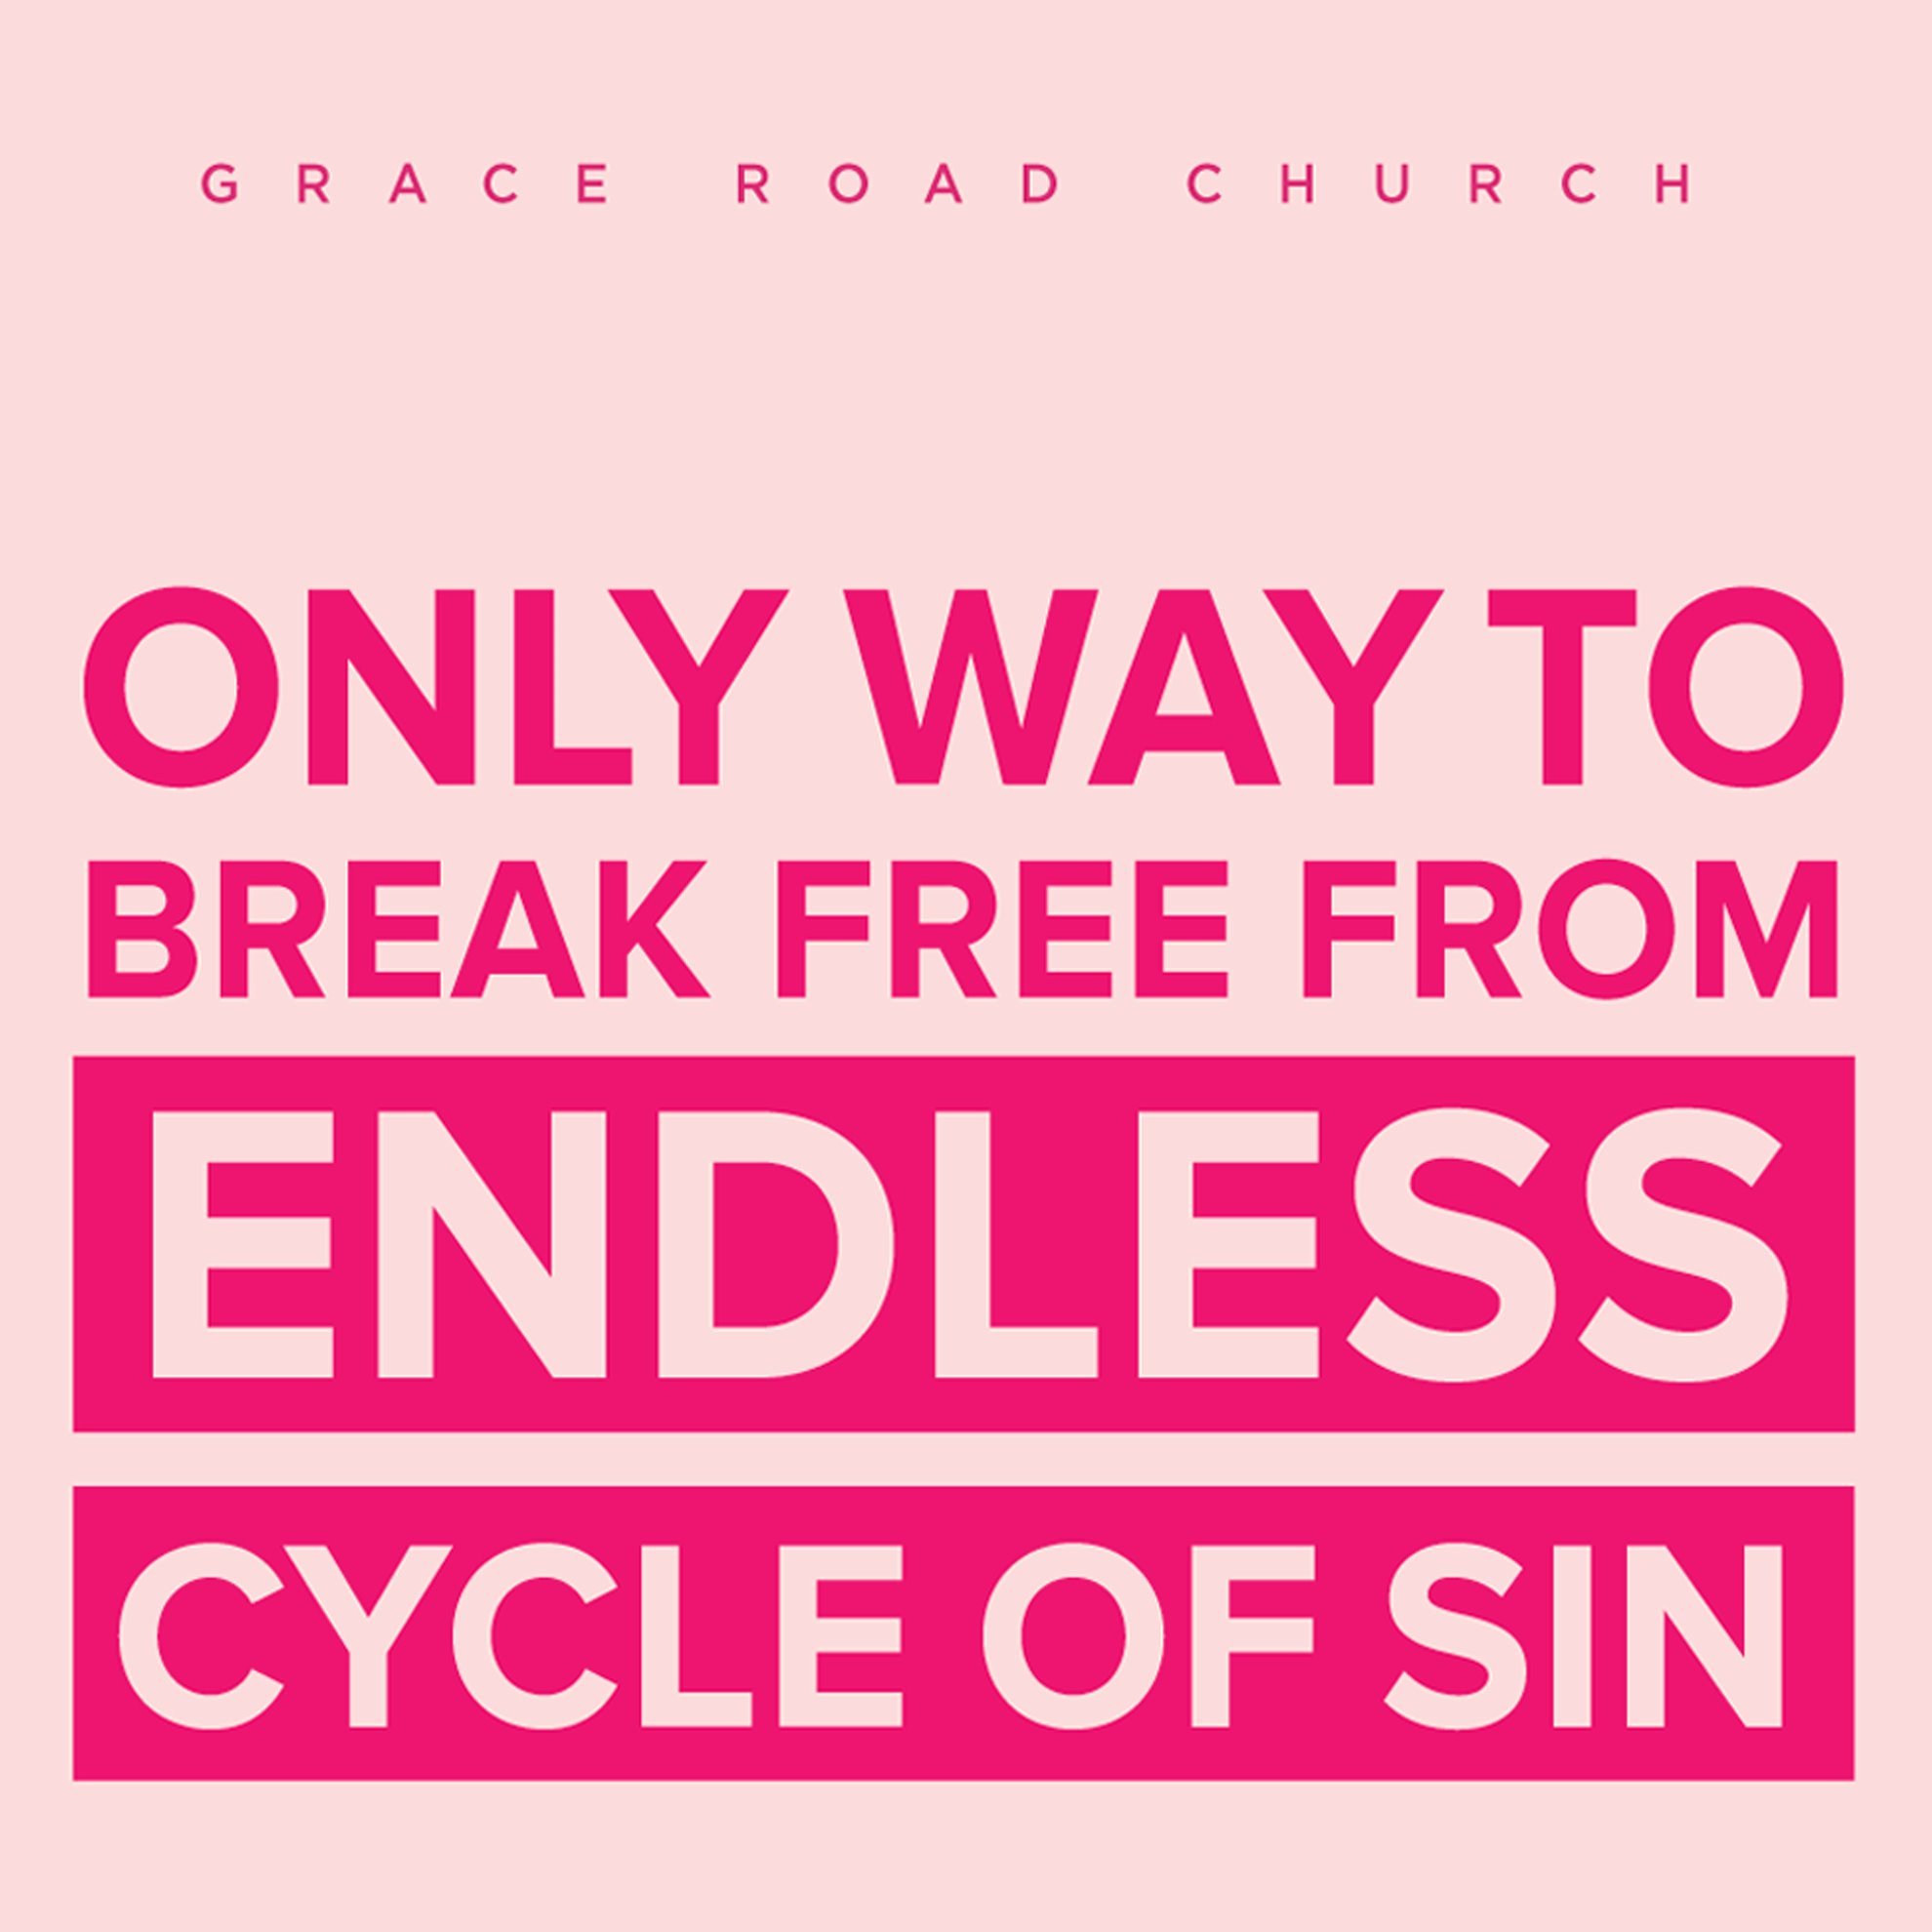 [Testimony] Only Way to Break Free From Endless Cycle of Sin